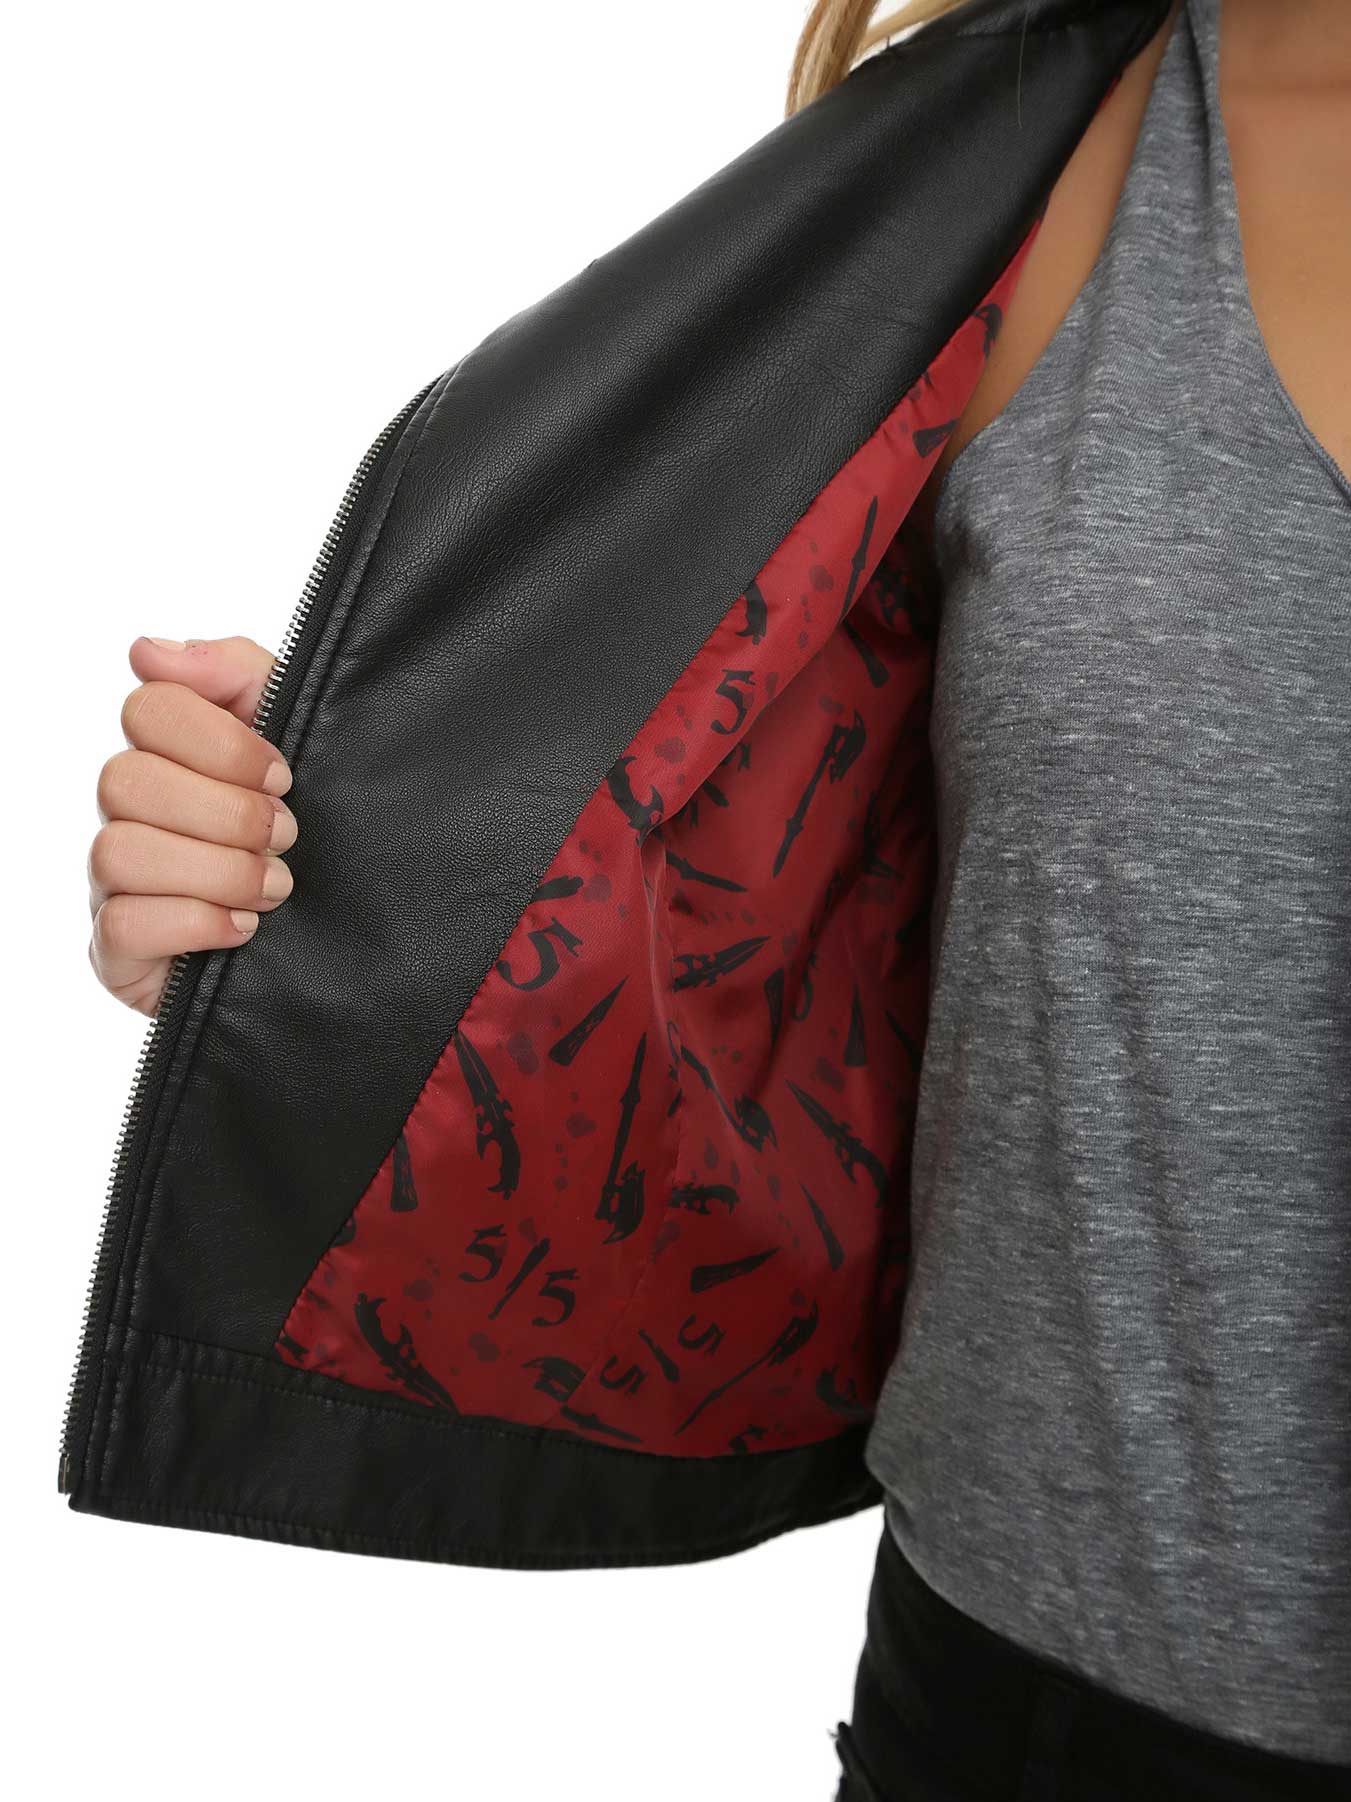 black leather jacket with red satin lining